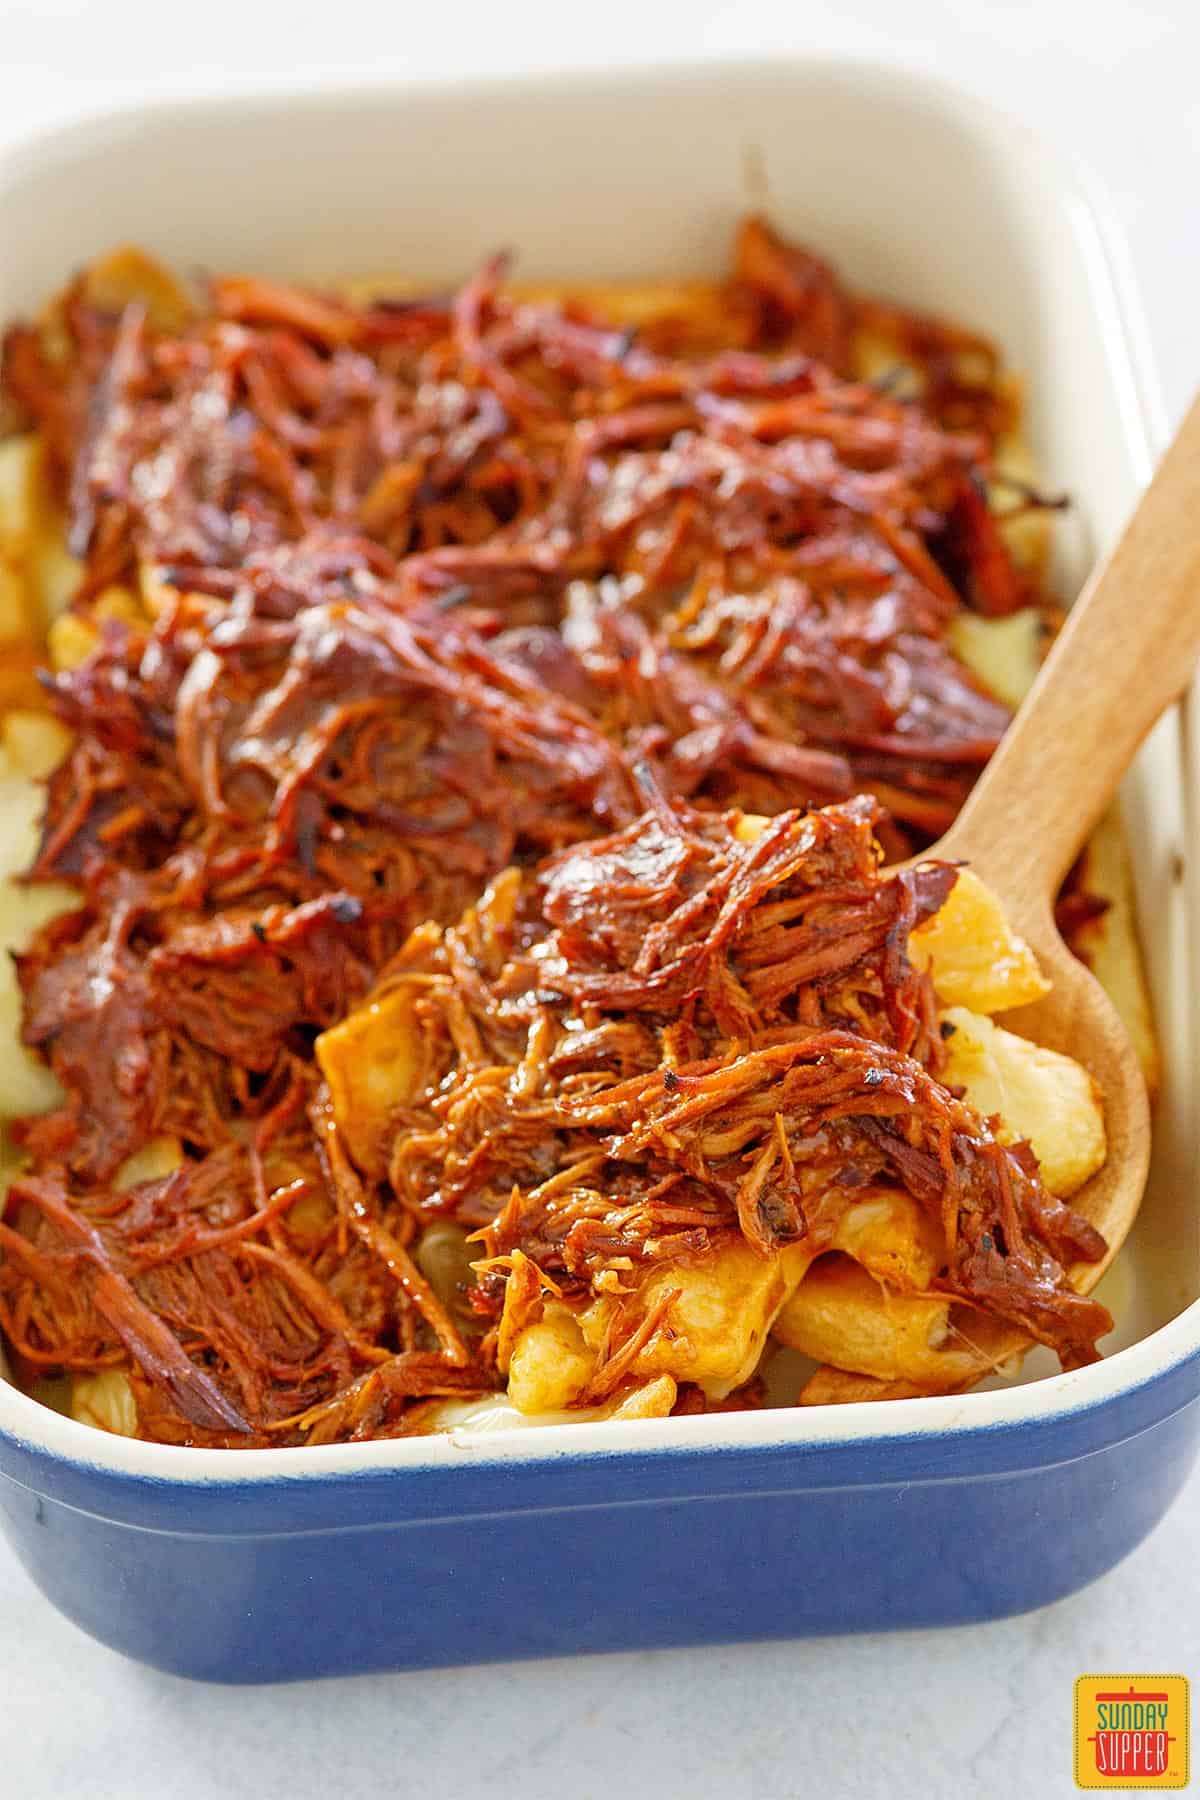 Pulled pork poutine in a blue baking dish